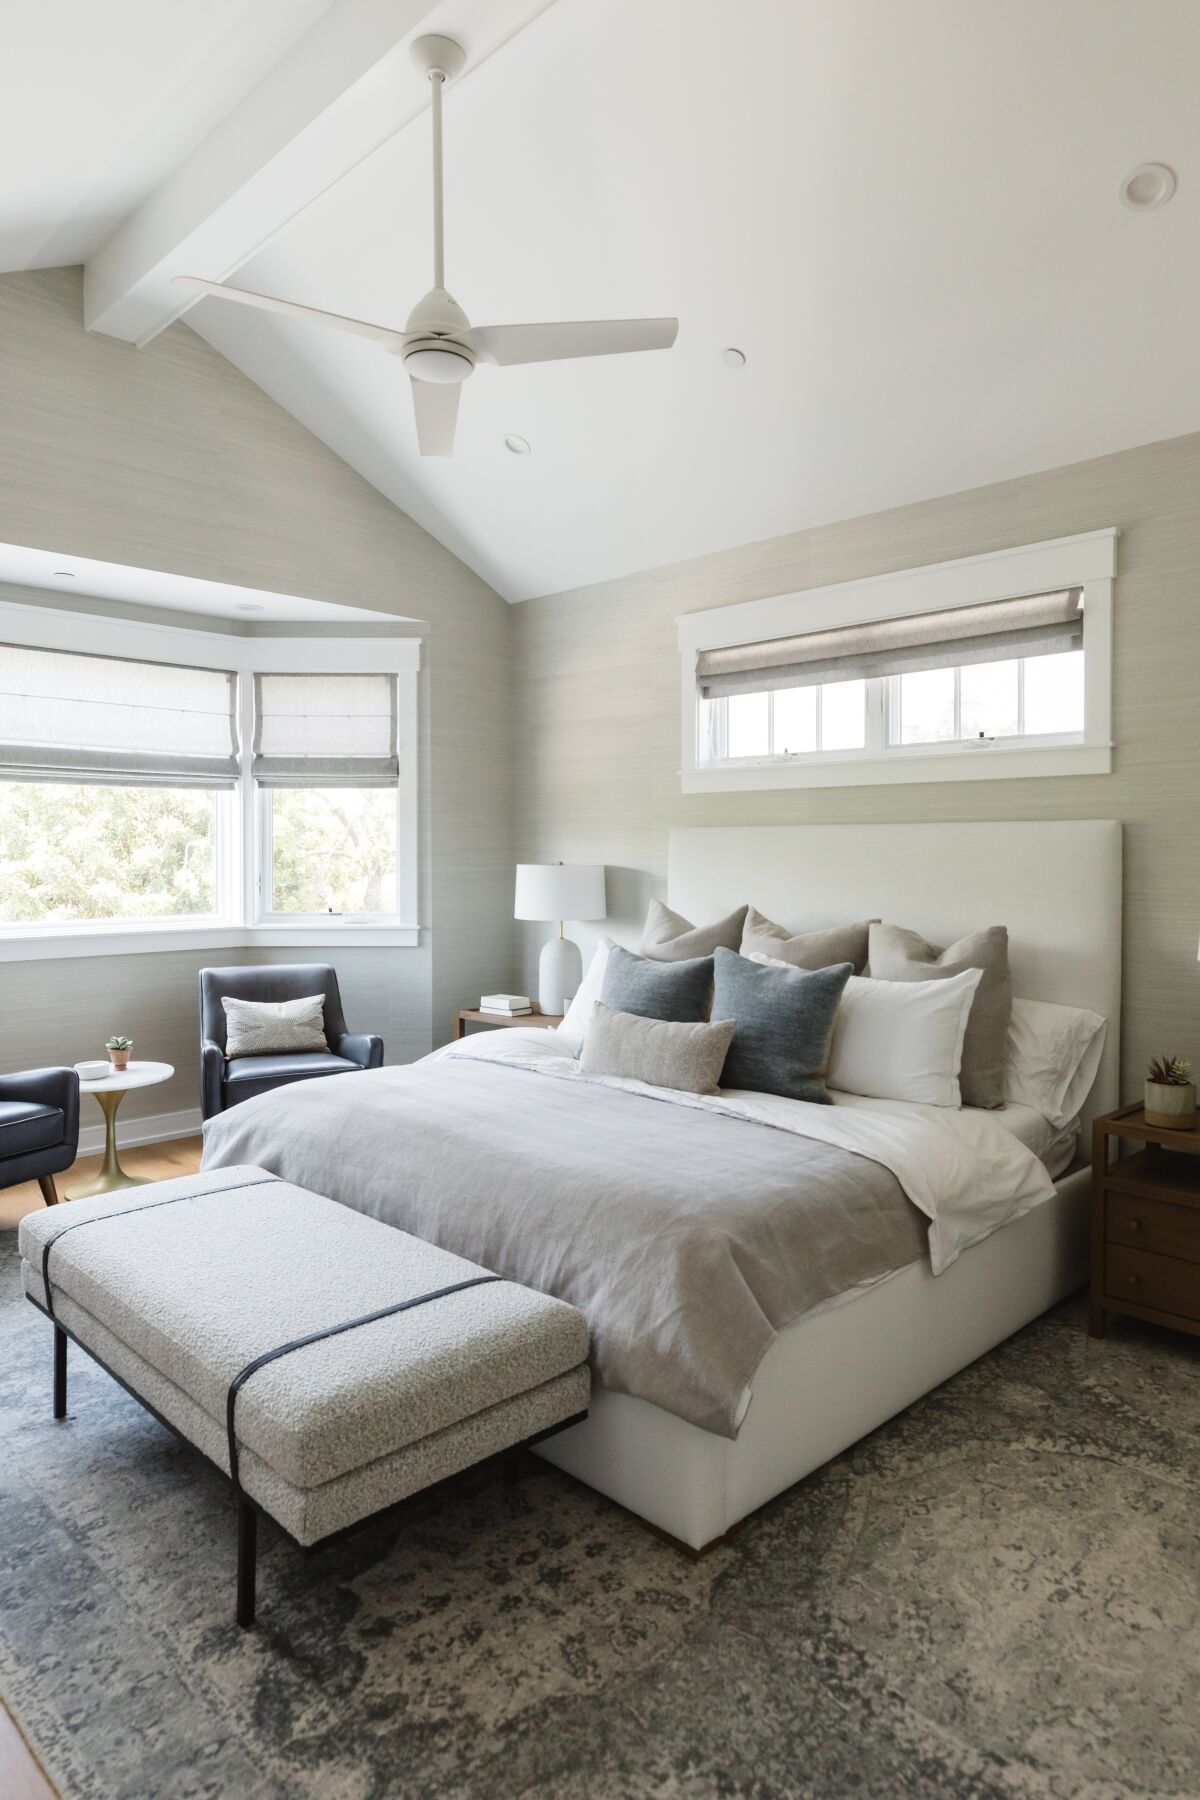 A Coronado bedroom in tone-on-tone colors has a sitting nook by a bay window and a bench at the foot of the bed.